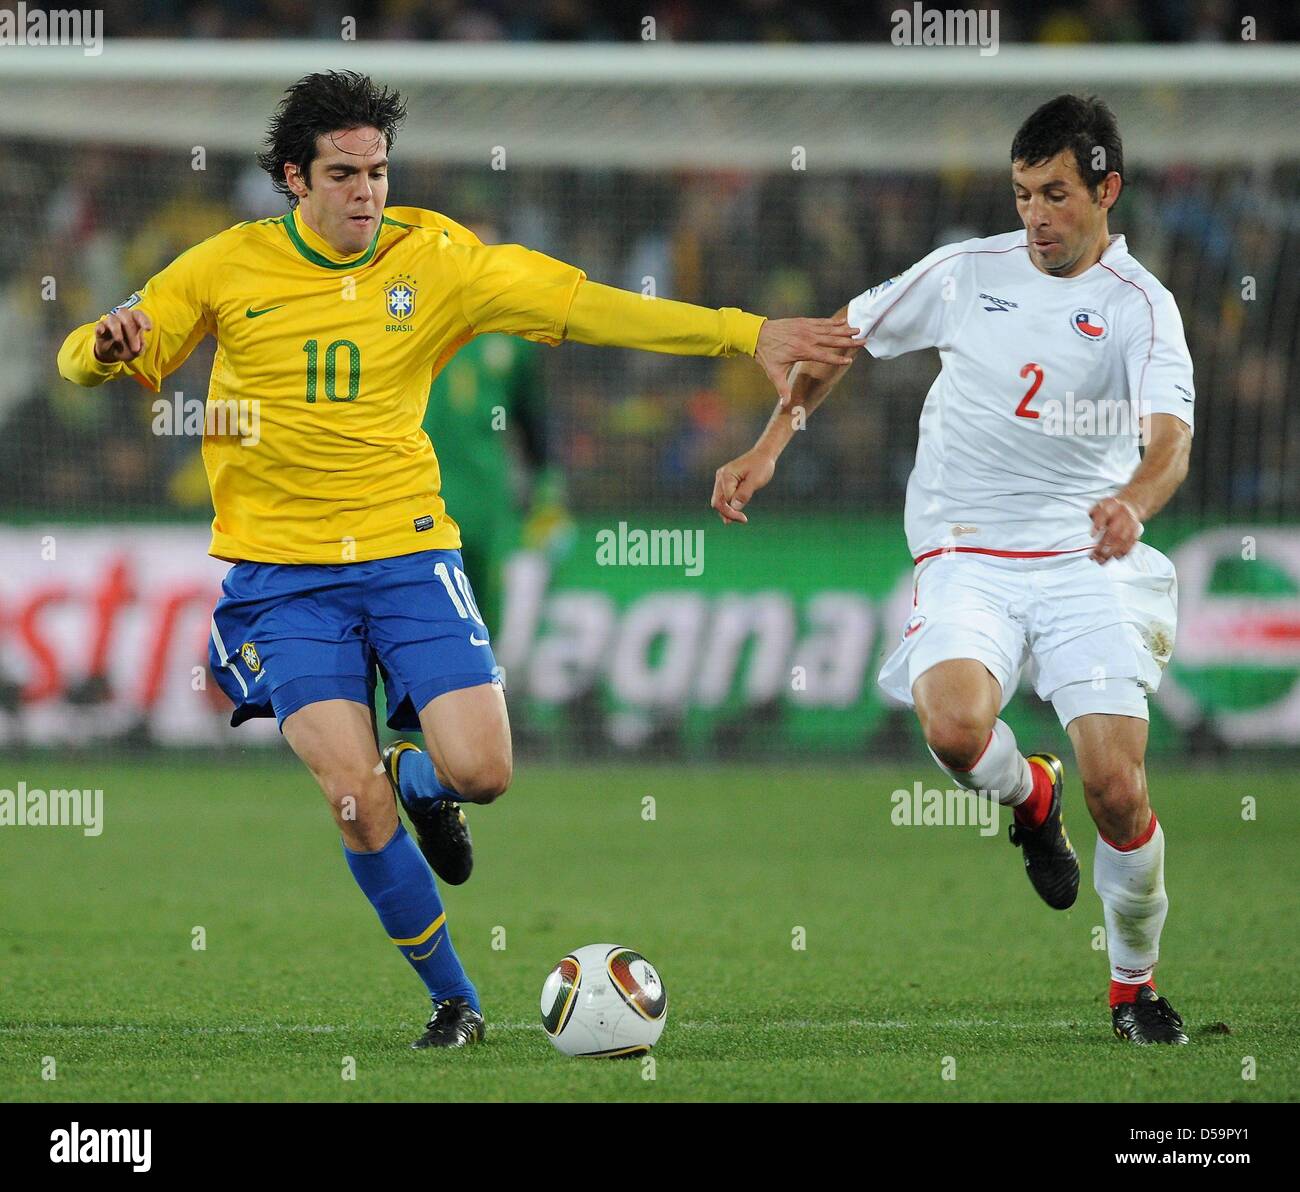 Brazil's Kaka (L) vies for the ball with Chile's Ismael Fuentes during the 2010 FIFA World Cup Round of Sixteen match between Brazil and Chile at the Ellis Park Stadium in Johannesburg, South Africa 28 June 2010. Photo: Marcus Brandt dpa - Please refer to http://dpaq.de/FIFA-WM2010-TC Stock Photo